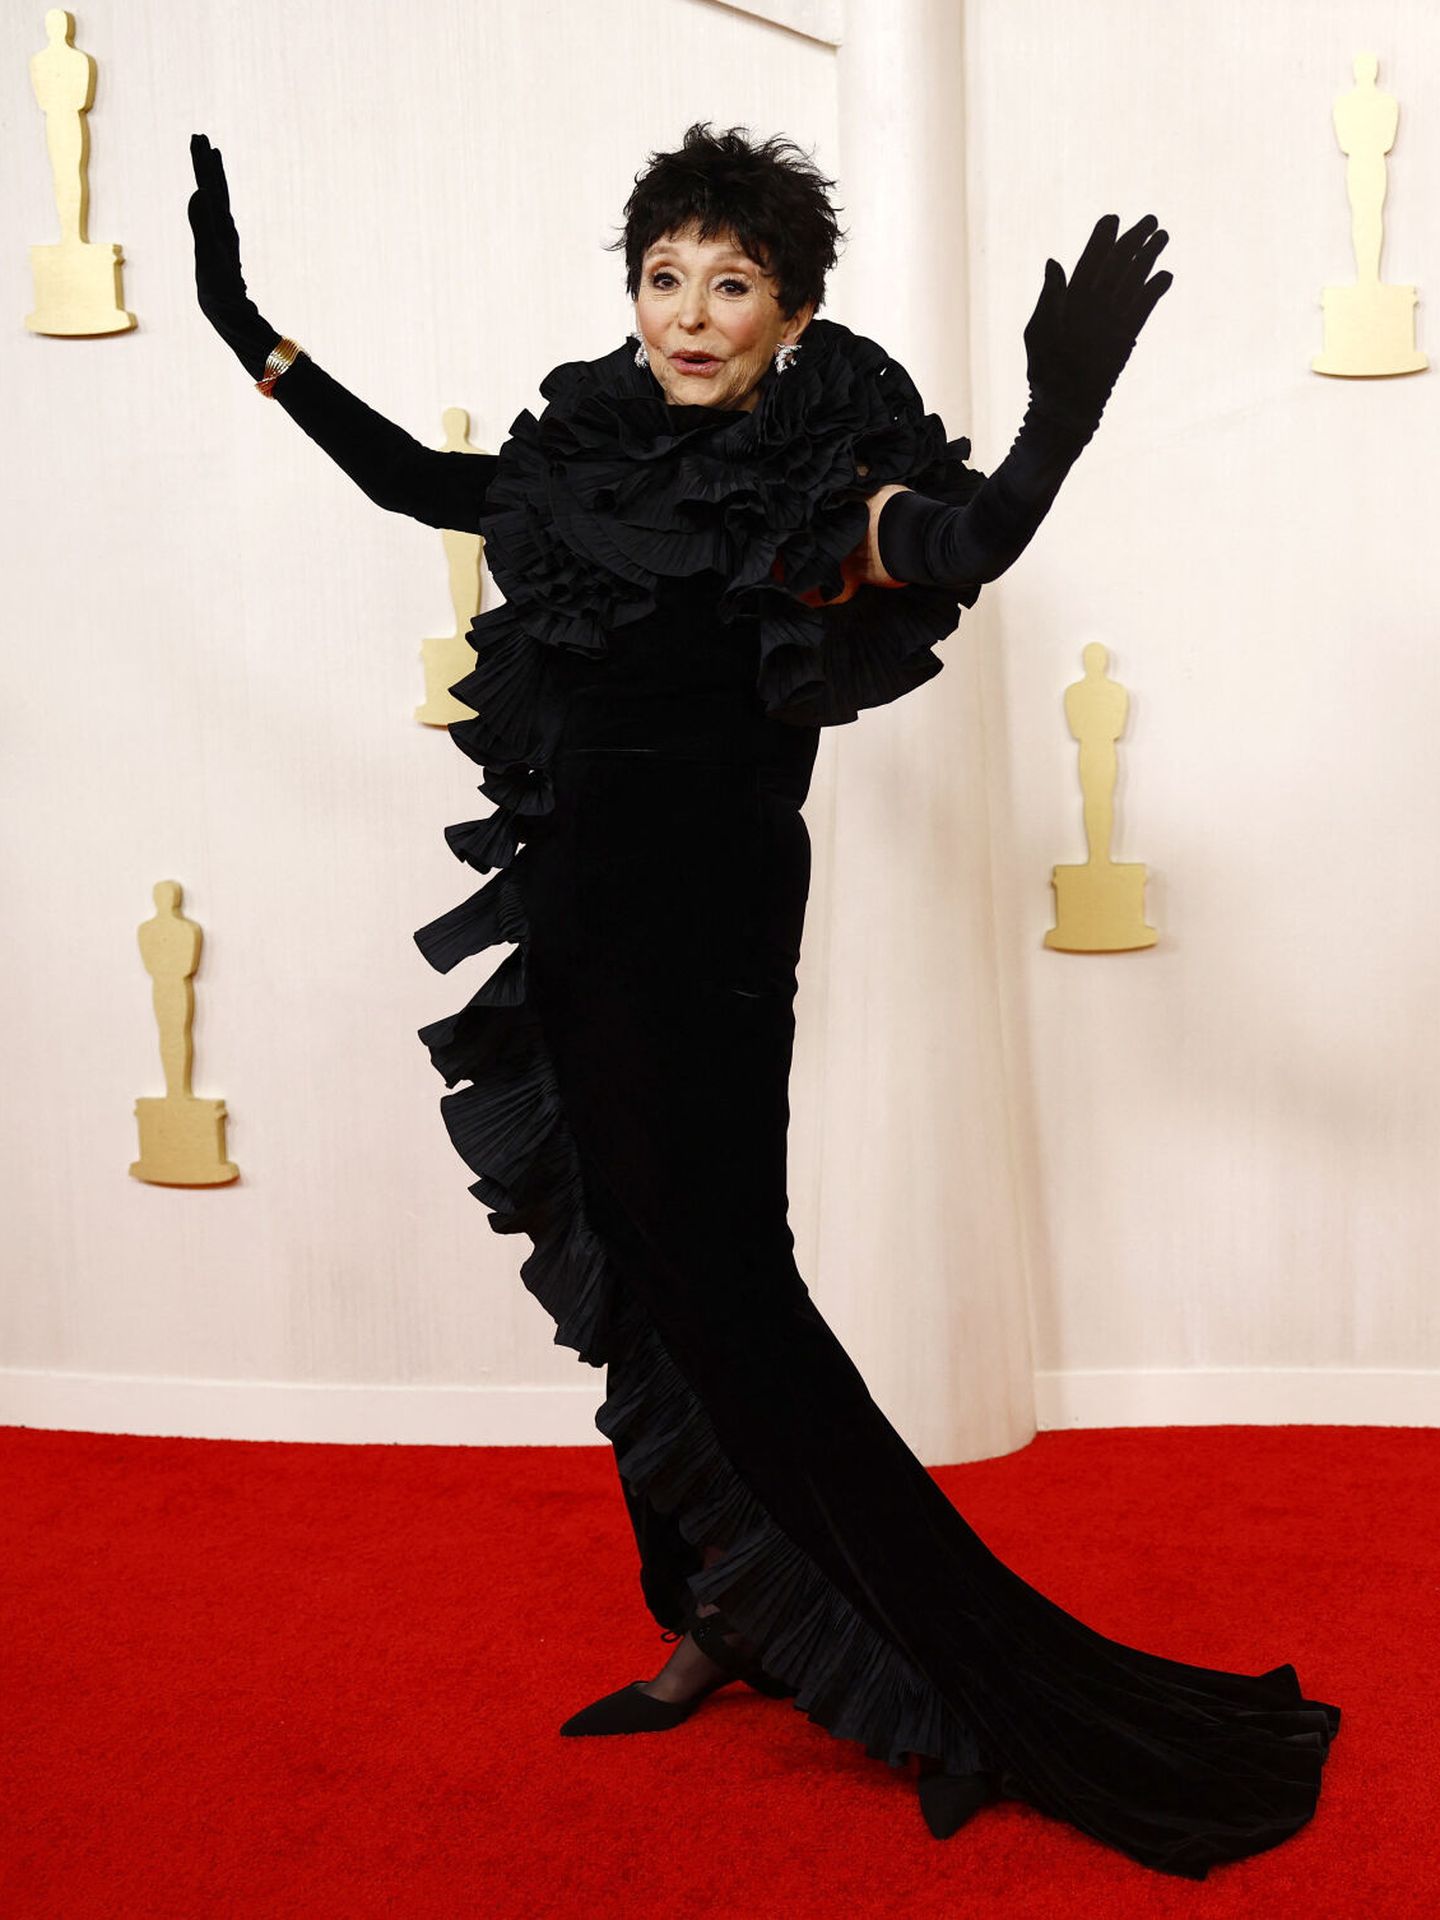 Rita Moreno poses on the red carpet during the Oscars arrivals at the 96th Academy Awards in Hollywood, Los Angeles, California, U.S., March 10, 2024. REUTERS Sarah Meyssonnier